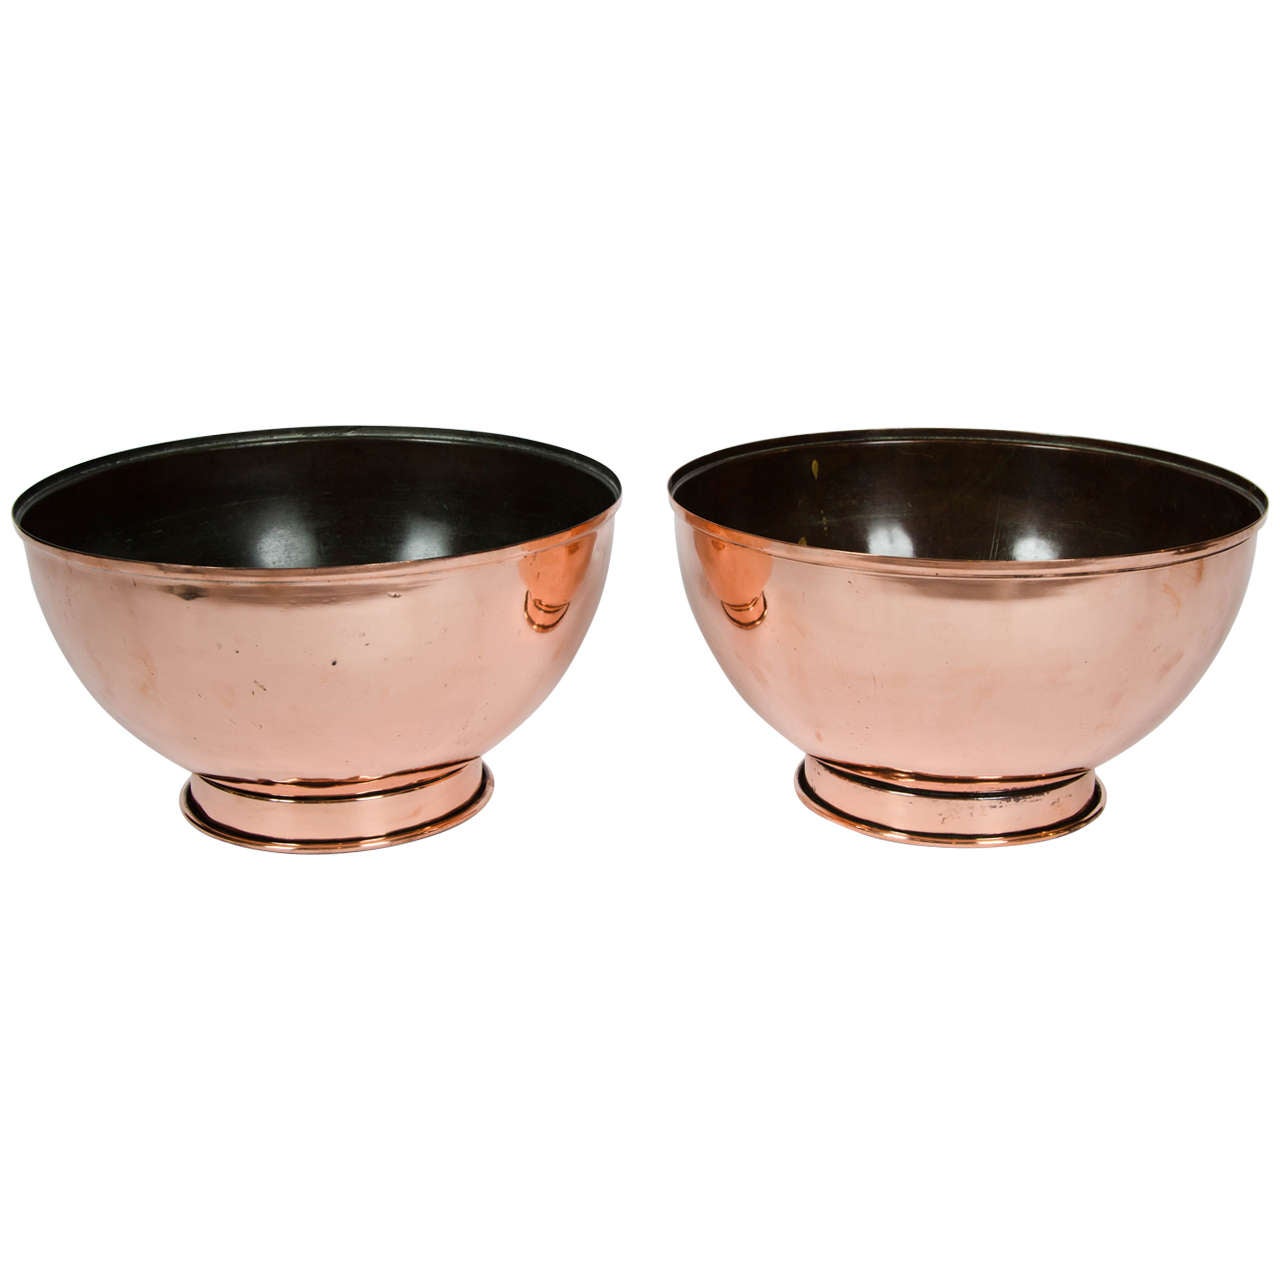 Pair of Early 19th Century Large Copper Bowls